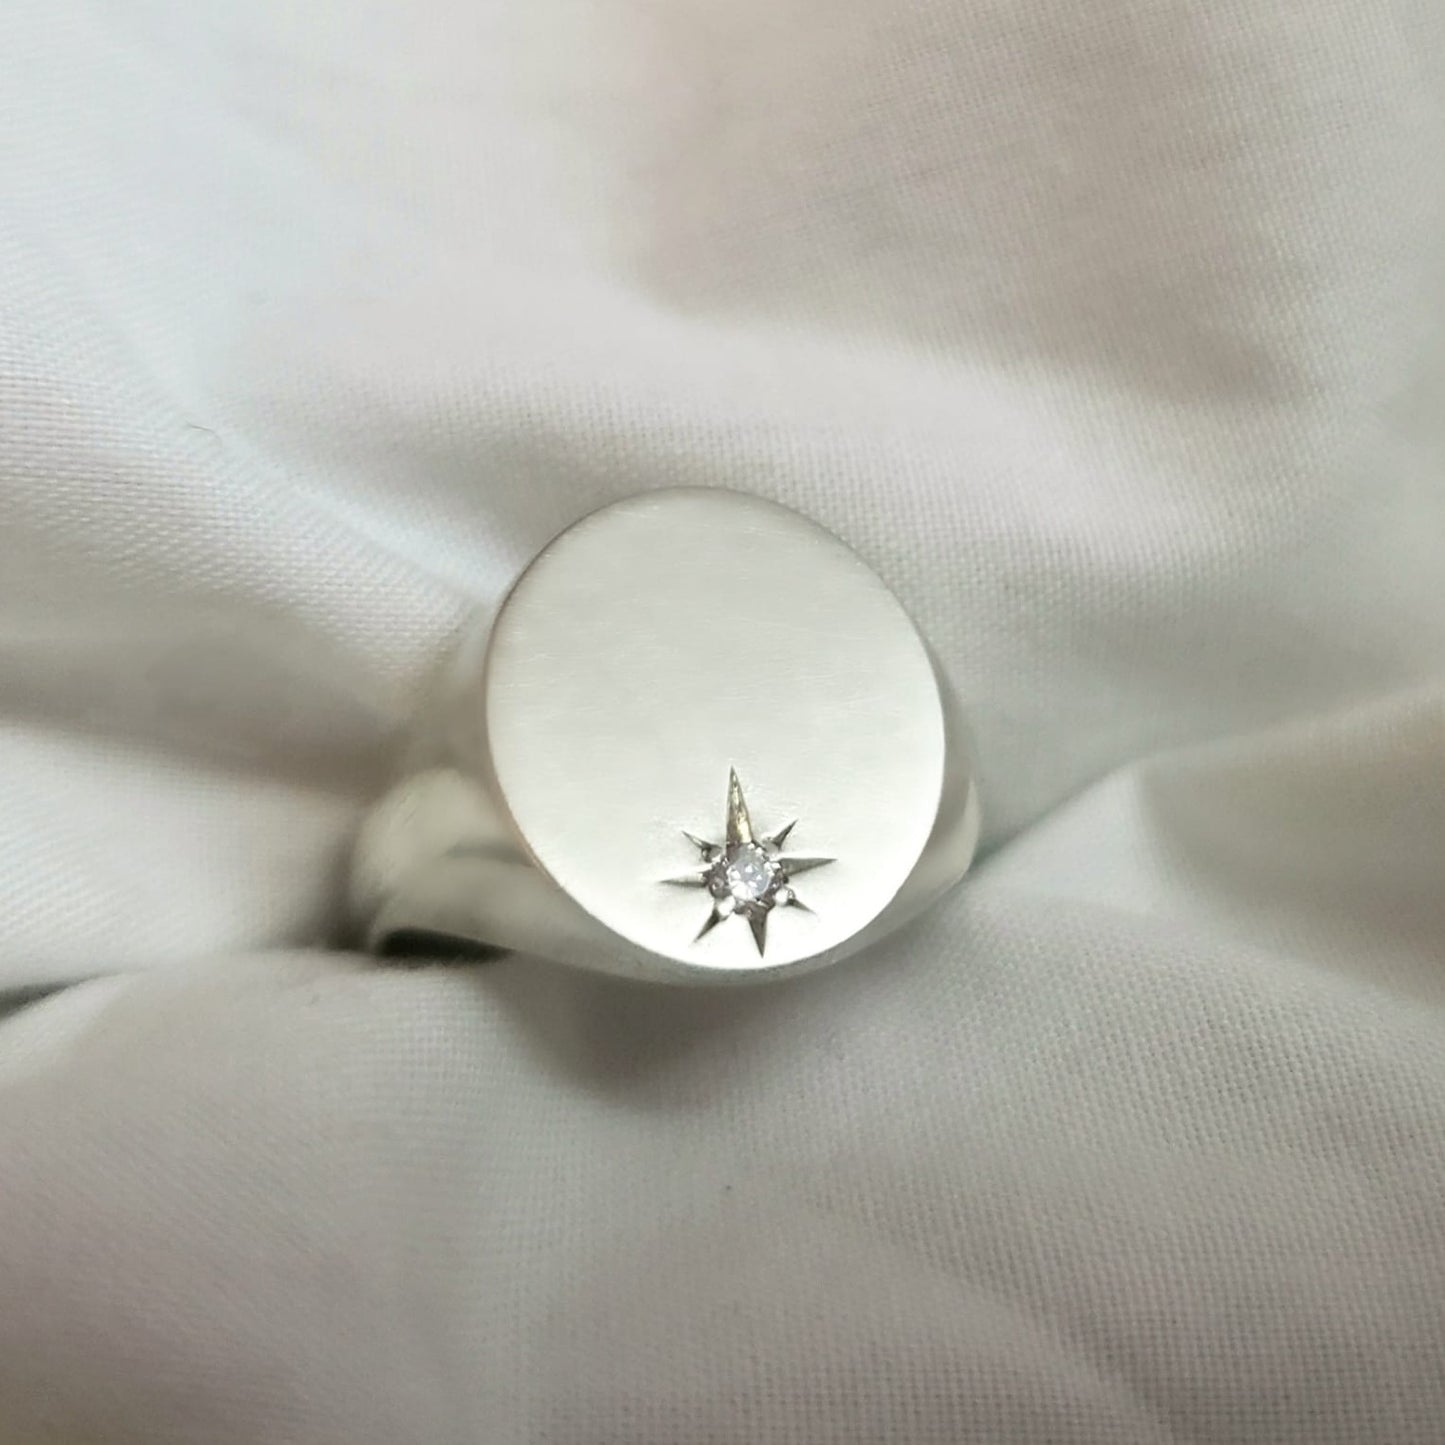 Northern Star ring silver